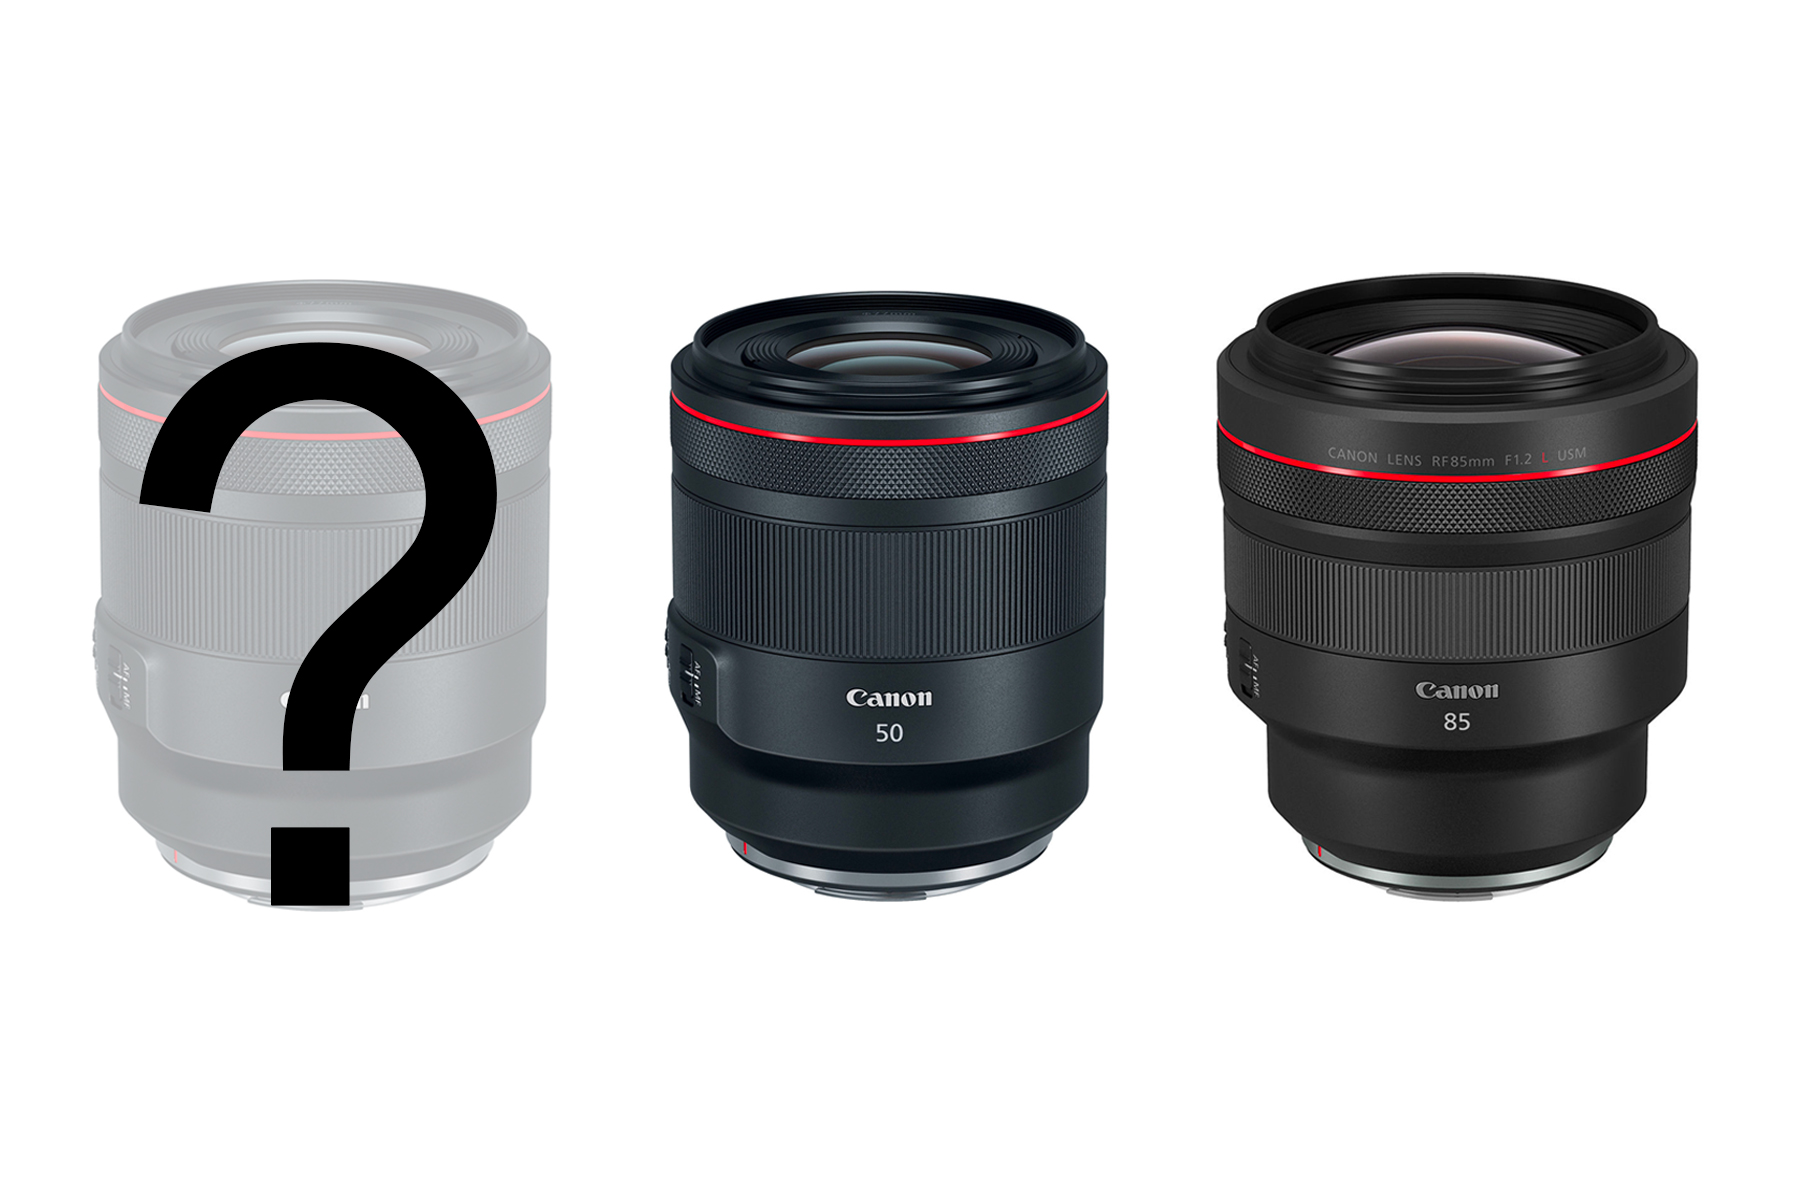 Canon RF 35mm f/1.2L Lens Rumor | Is this Canon’s next release?